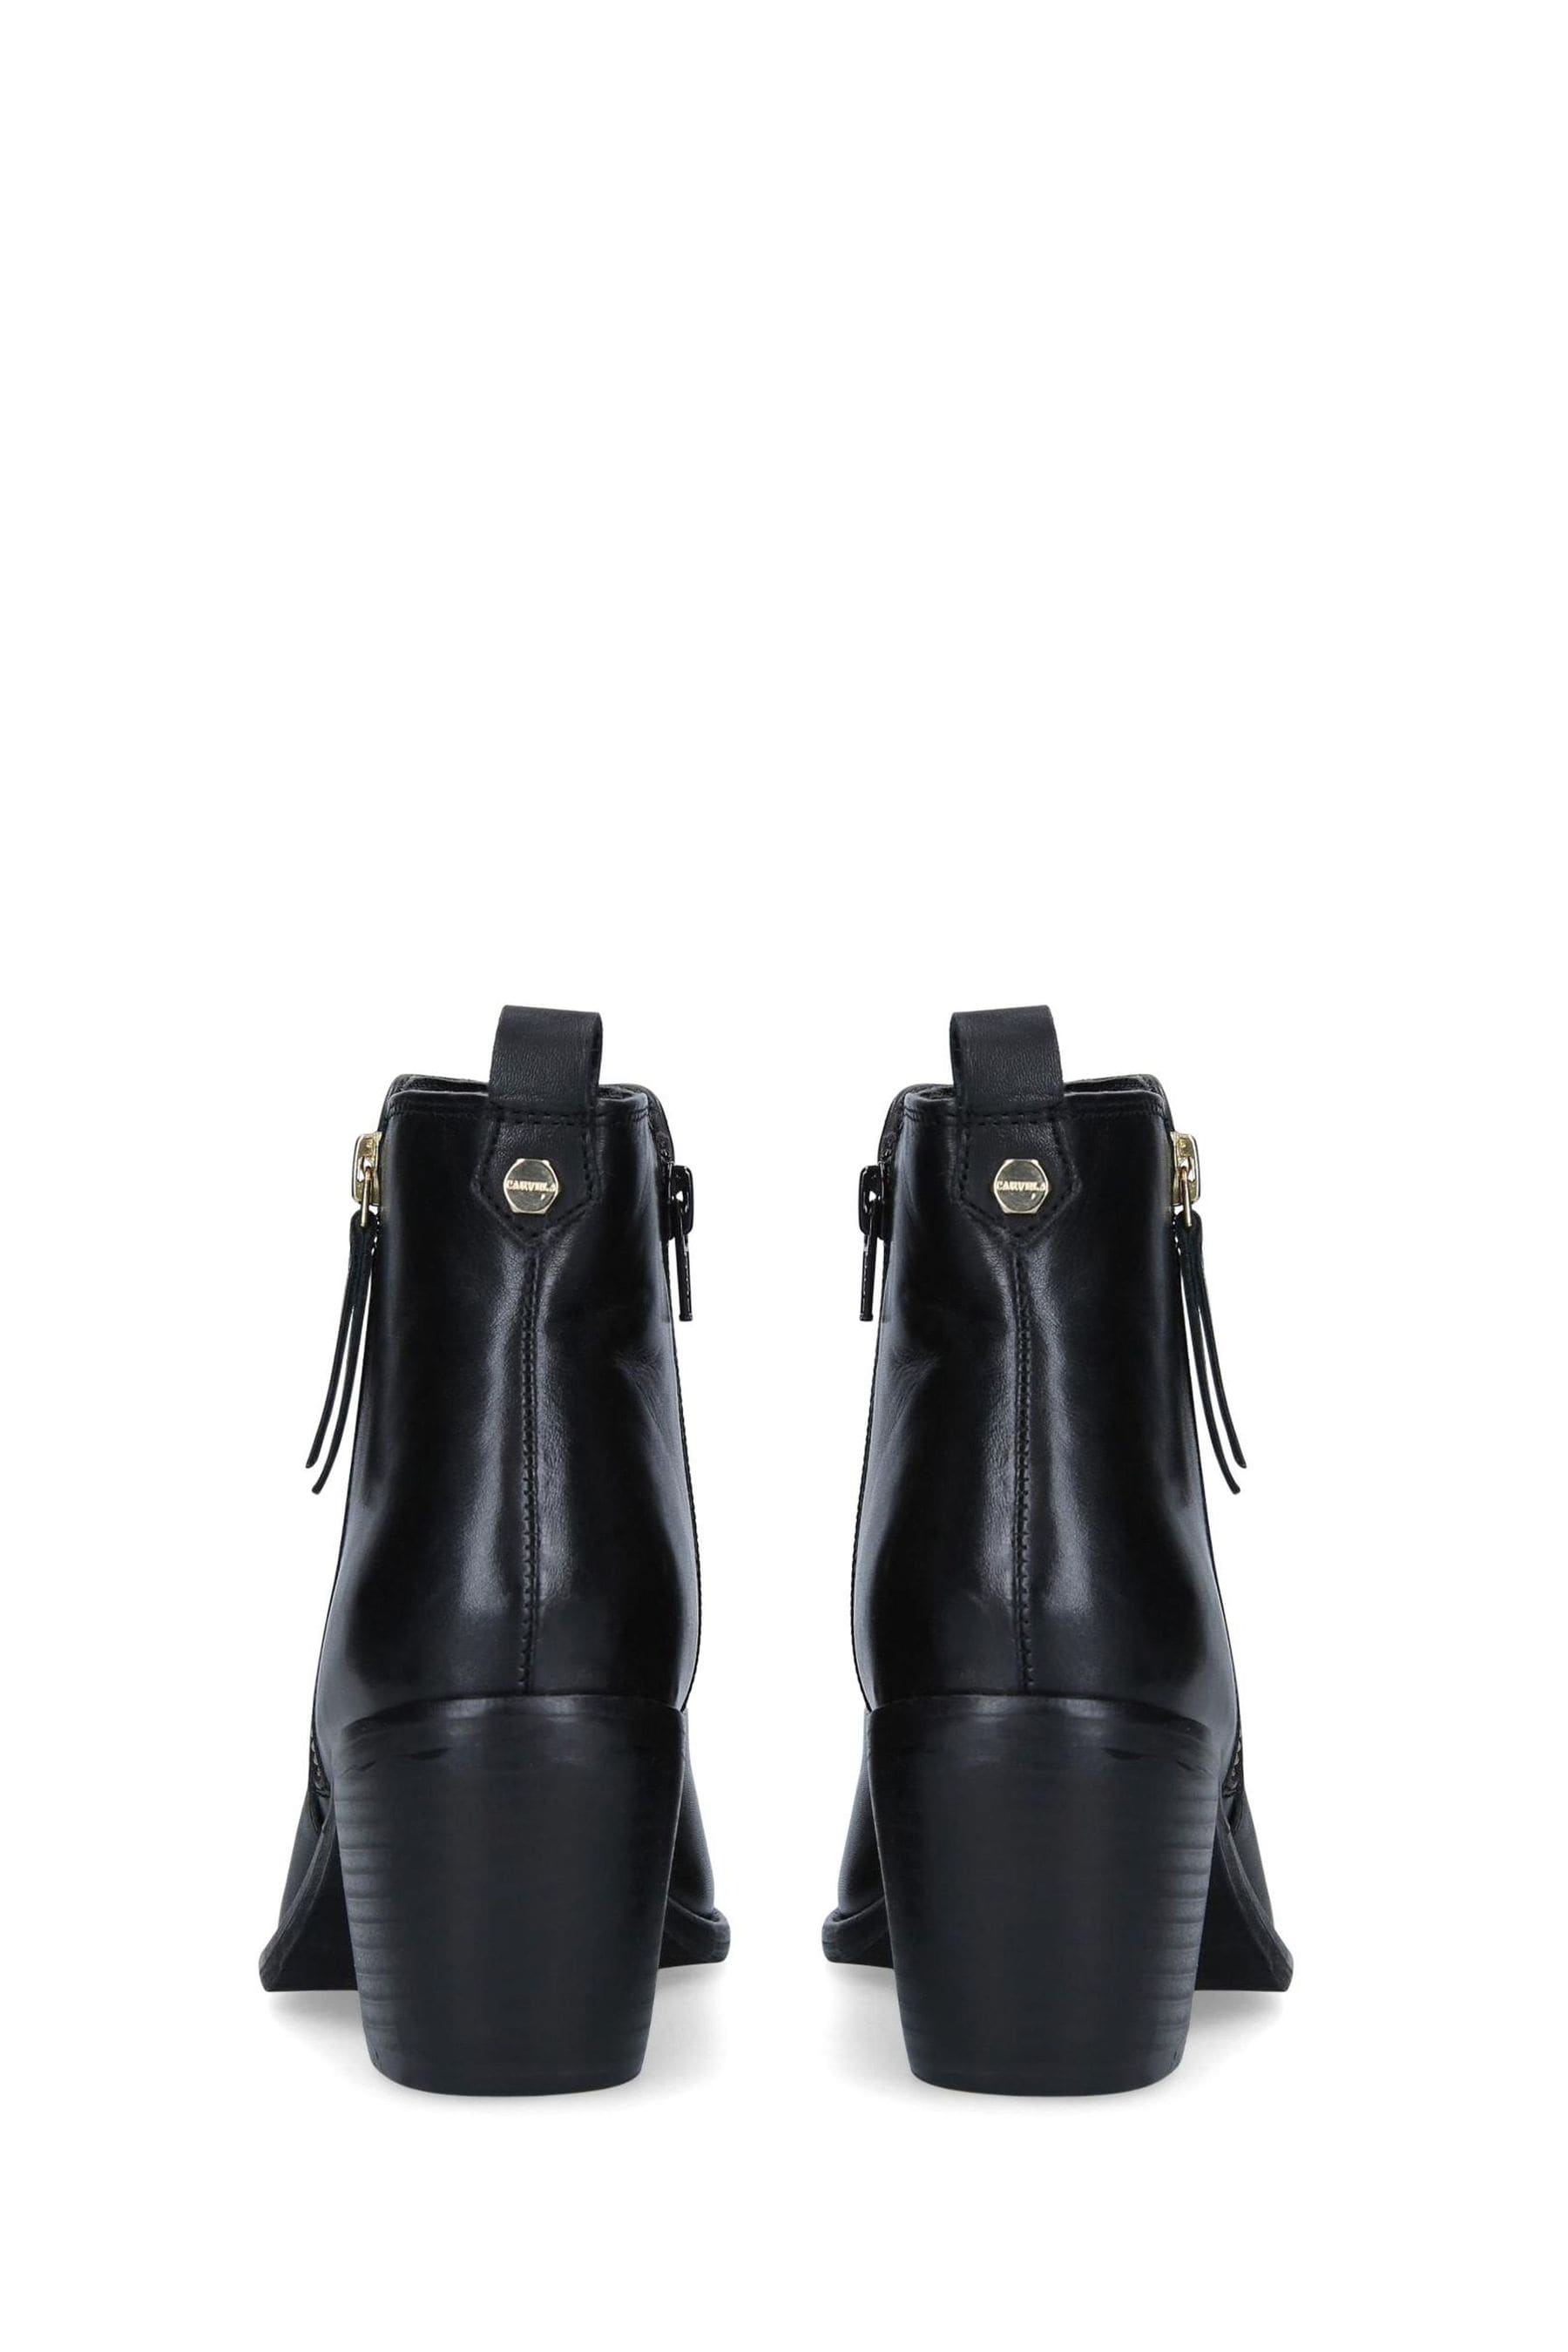 Buy Carvela Secil Boots from the Next UK online shop